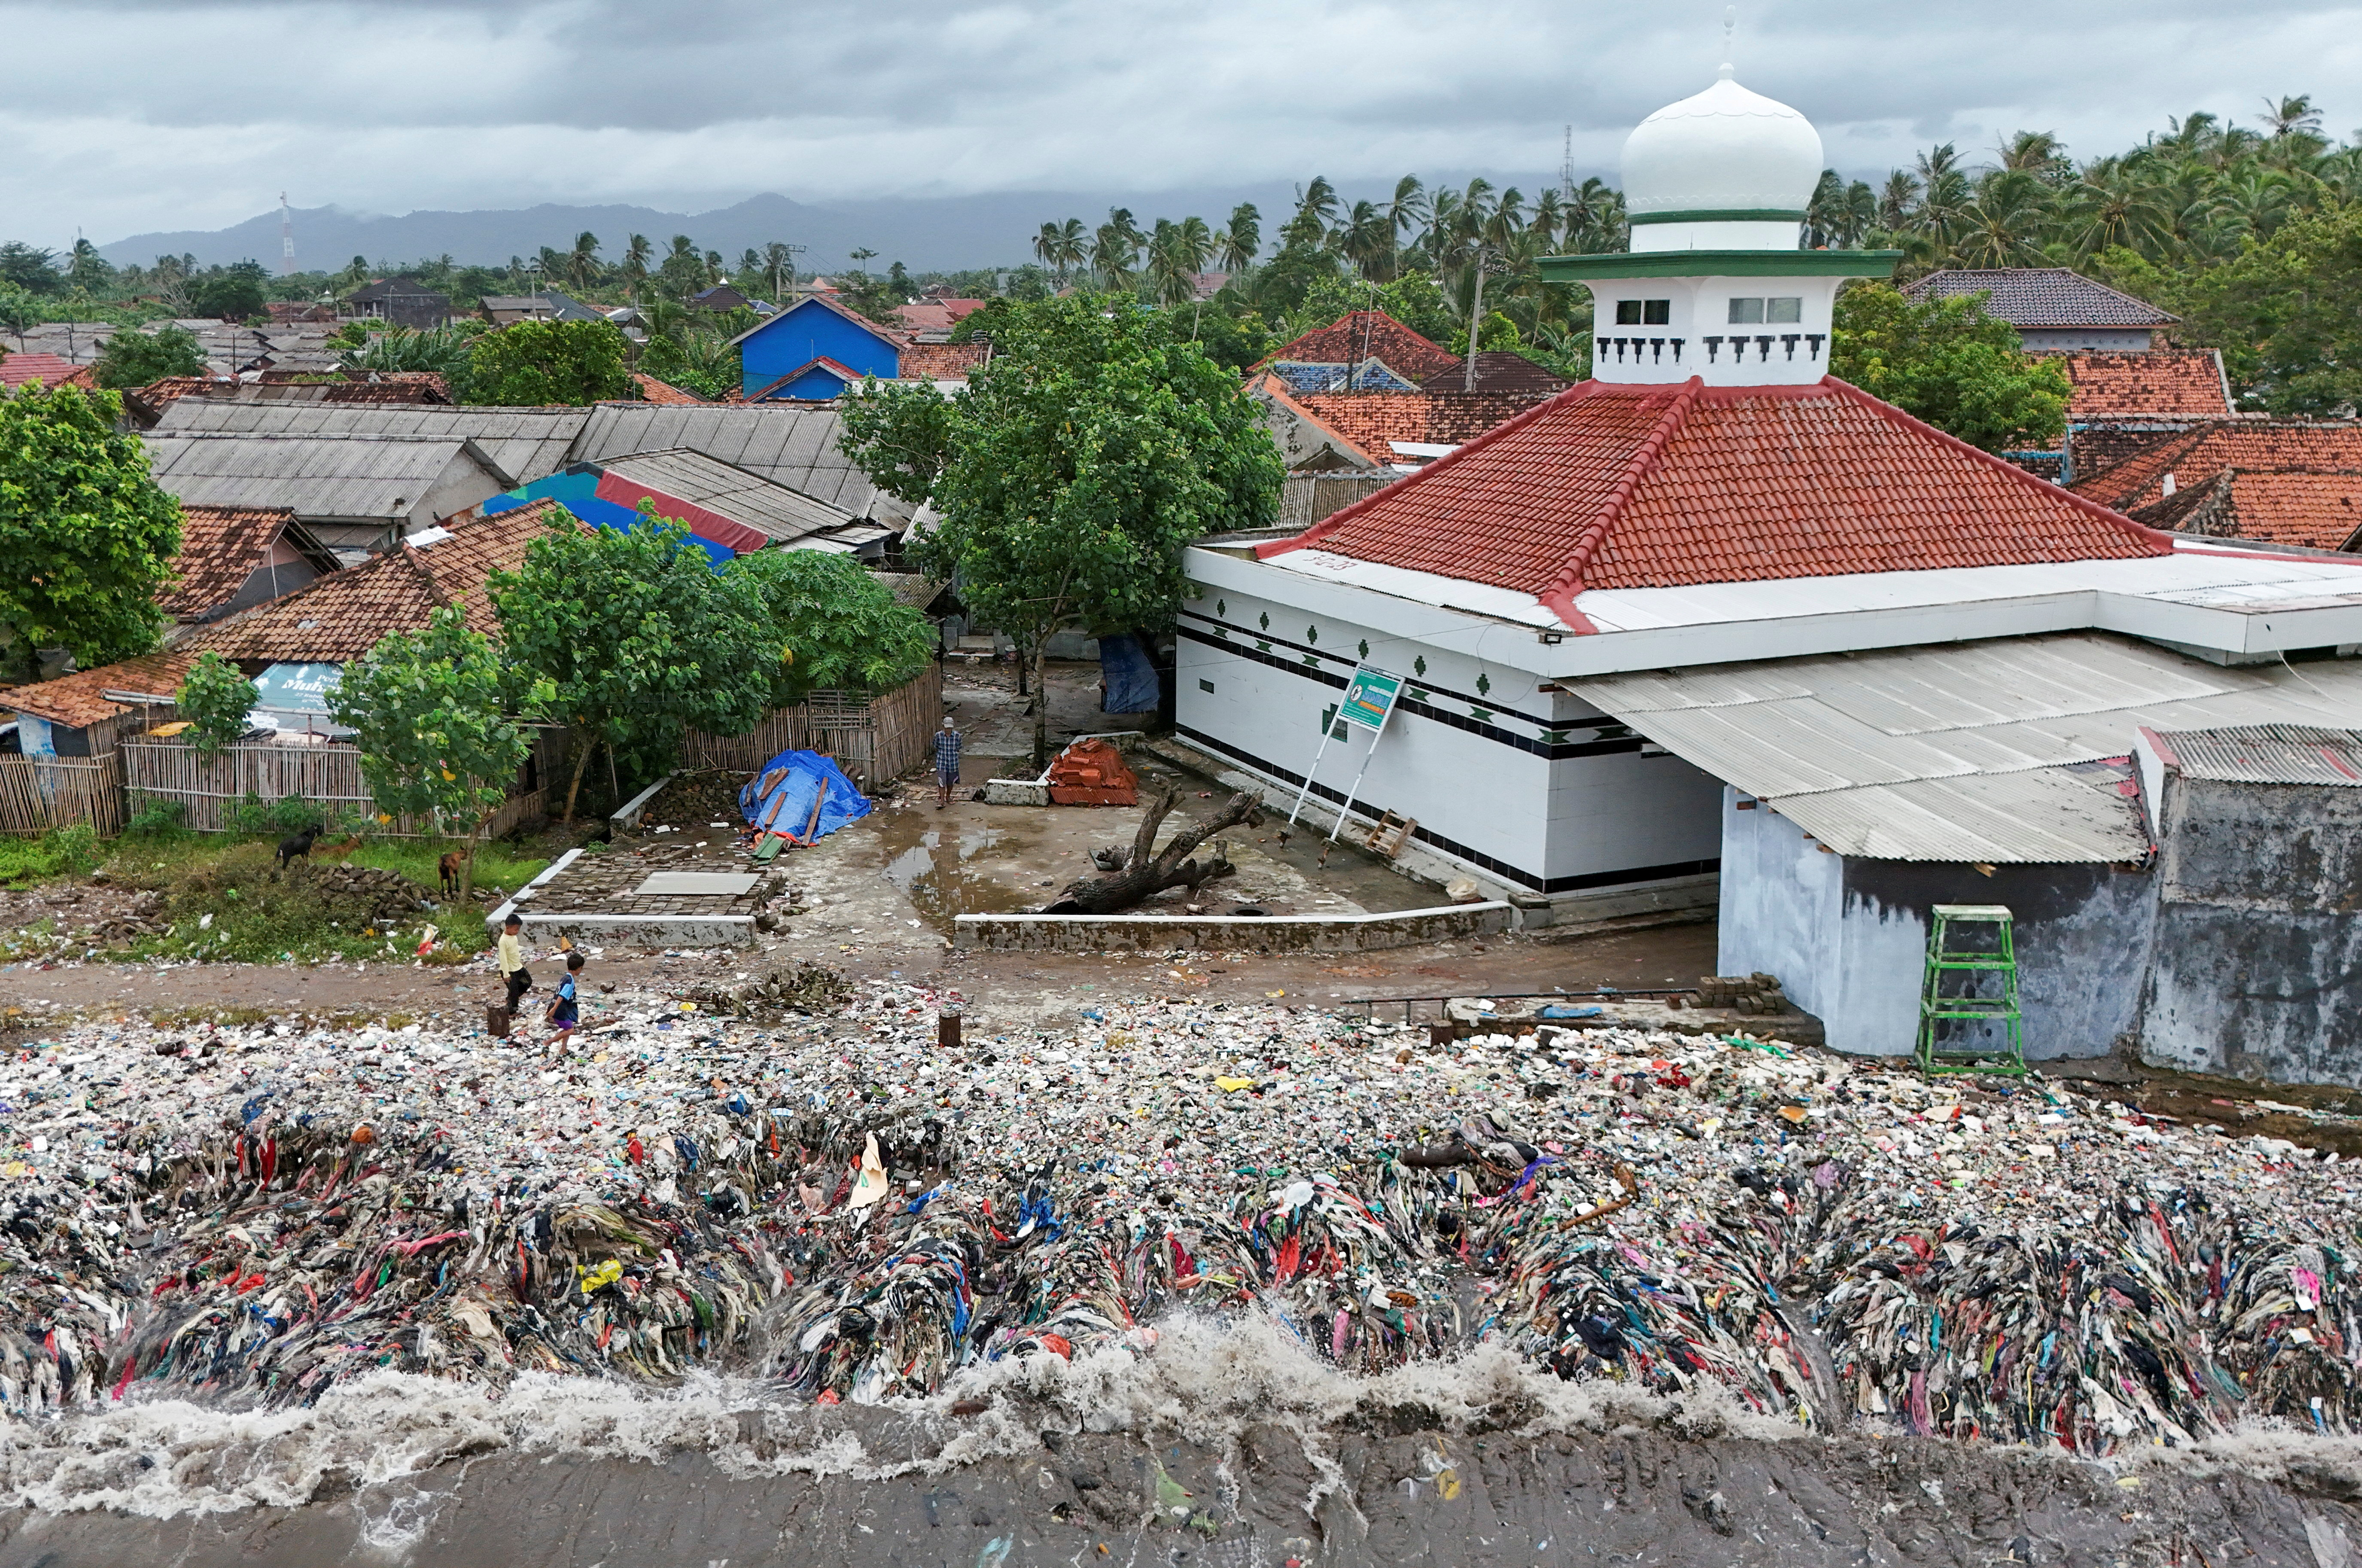 Indonesian fishing village grapples with piles of trash amid erratic high tides